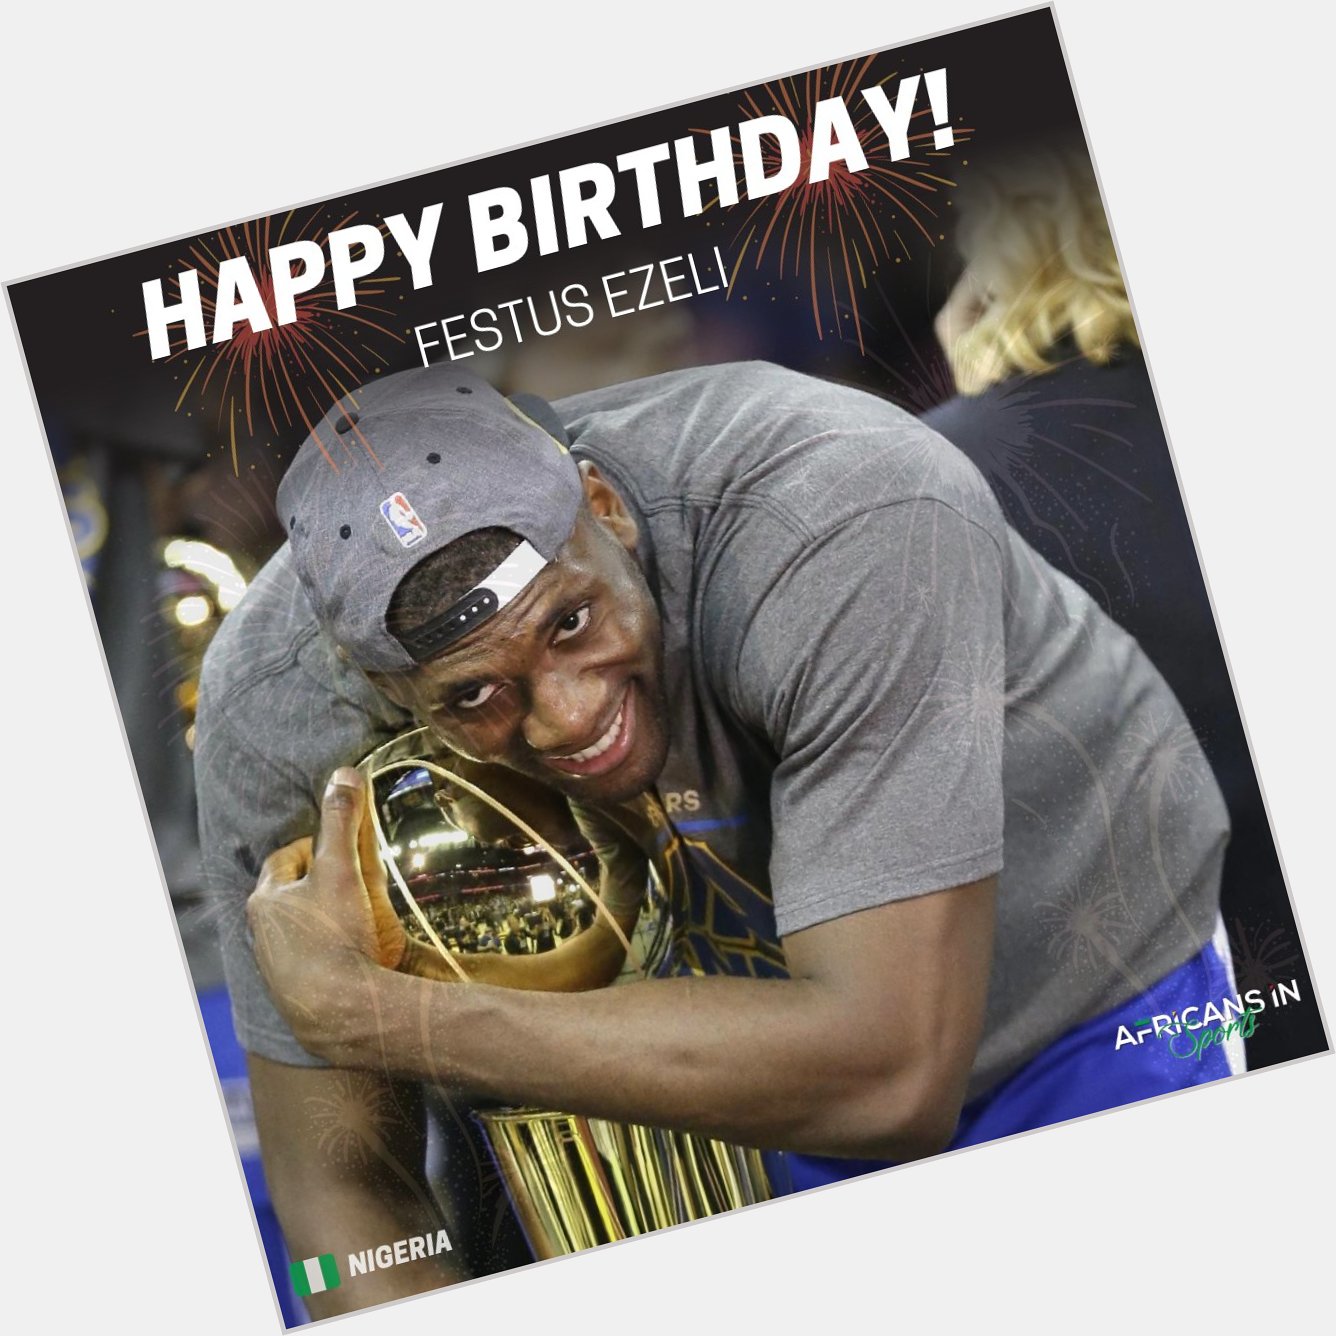 Happy Birthday to Nigerian basketballer and NBA champion, Festus Ezeli  -
Send him love via the comment section 